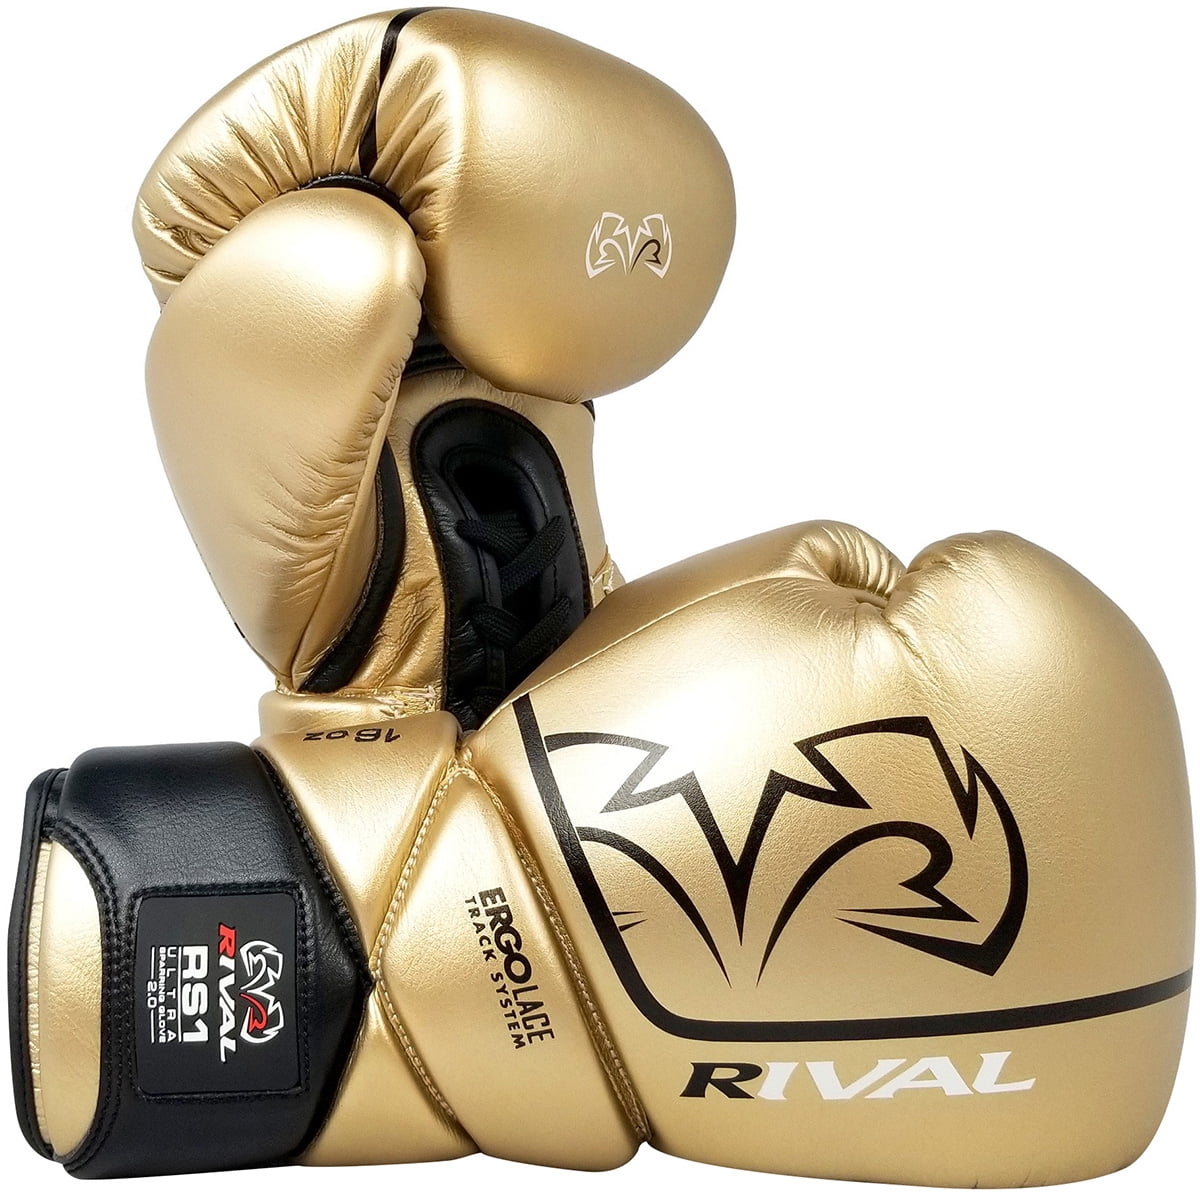 Rival Boxhandschuhe RS100 Professionell Sparring Training Workout Weiß Gold 